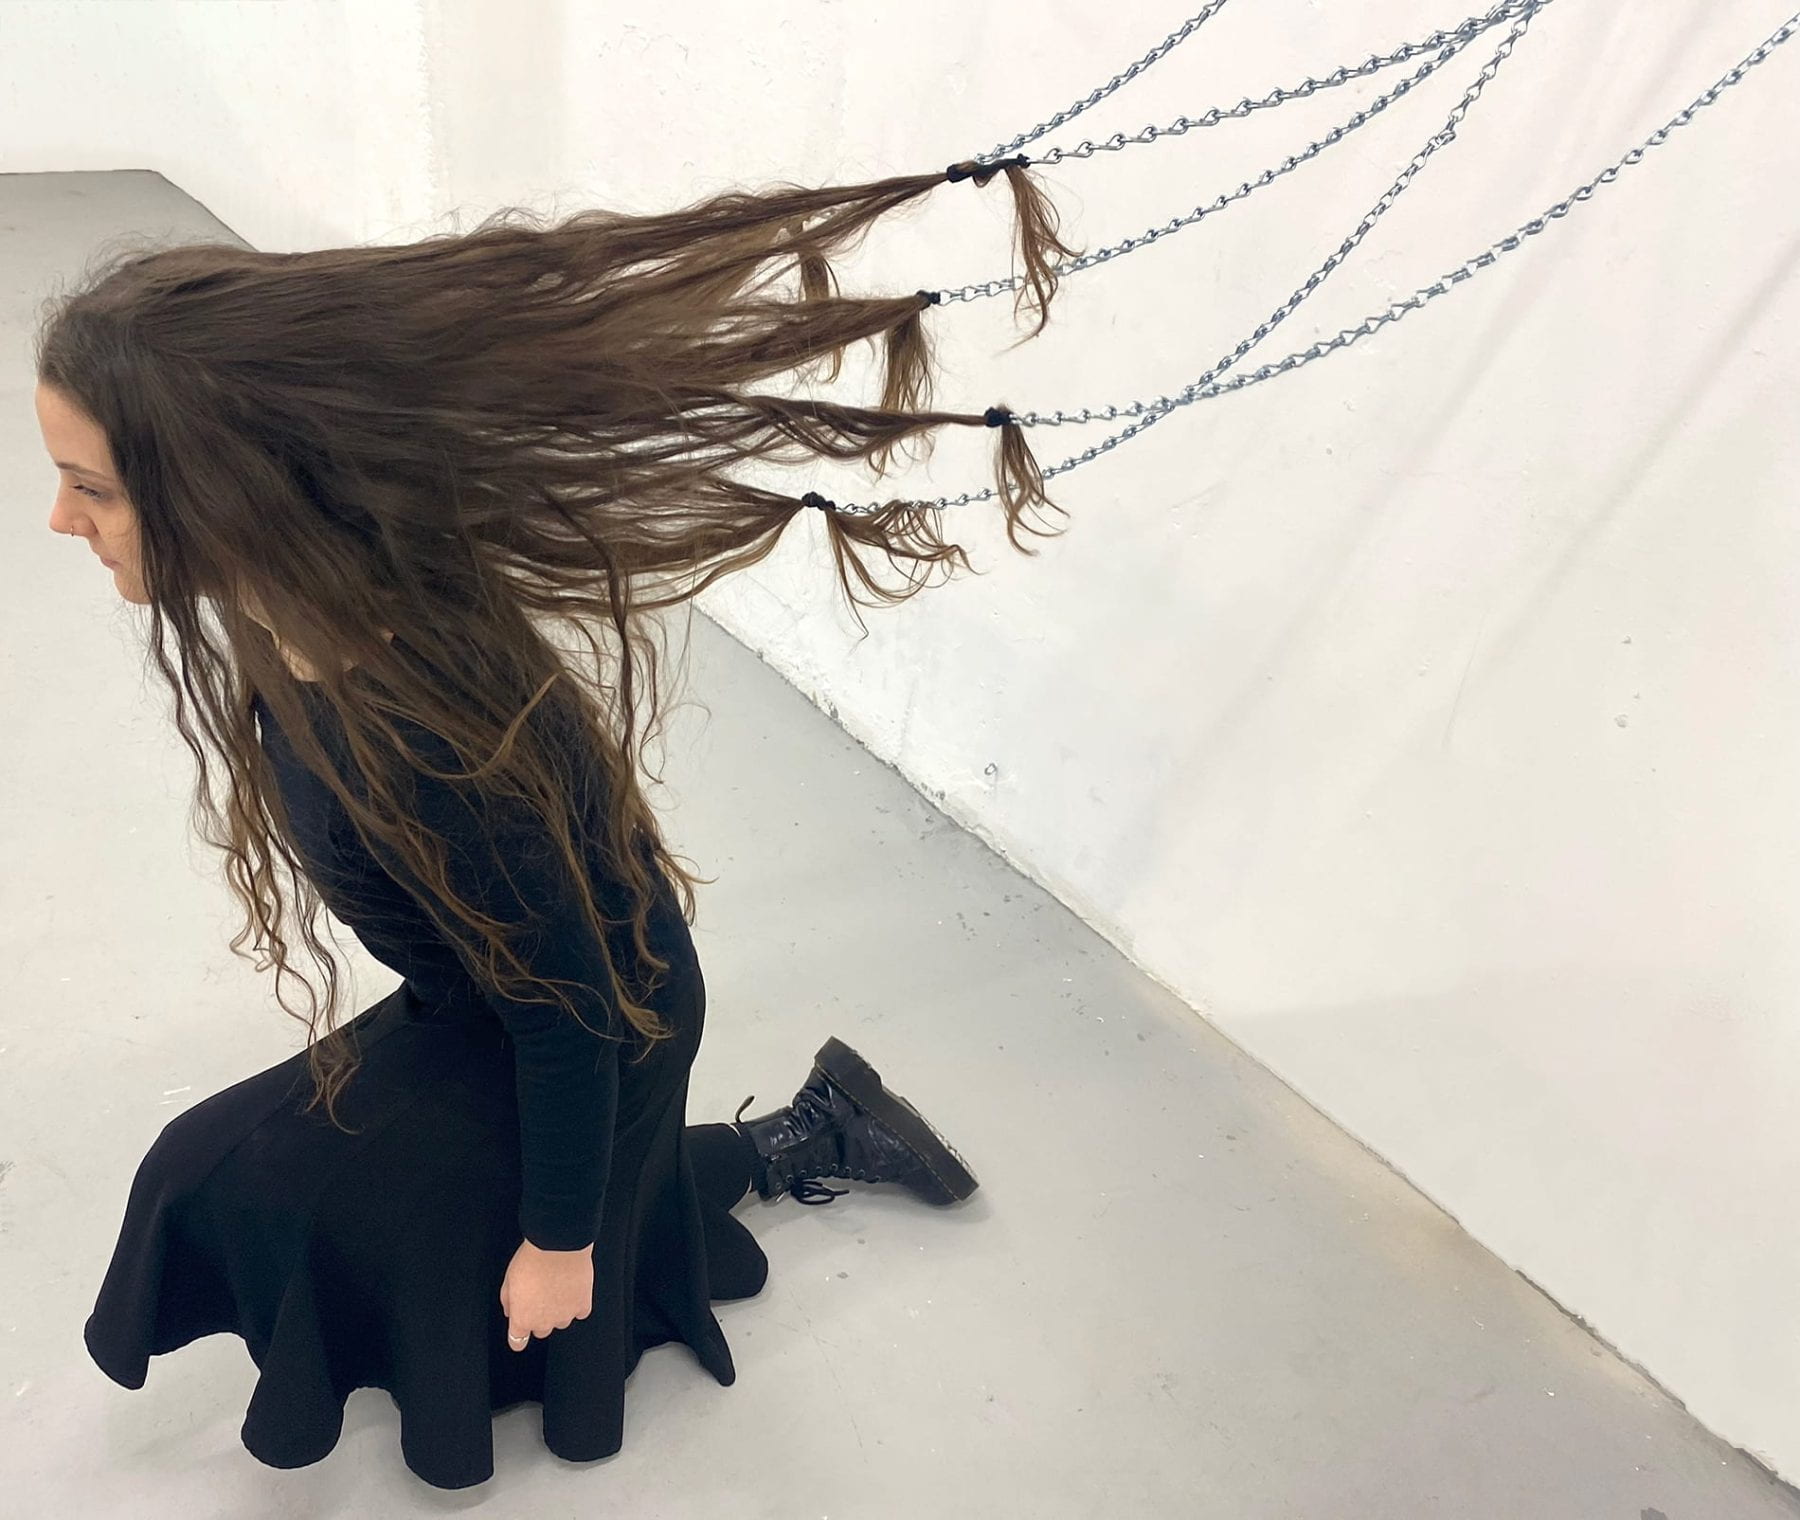 Photograph of a performance trial involving hair connected to chains attached to the wall.